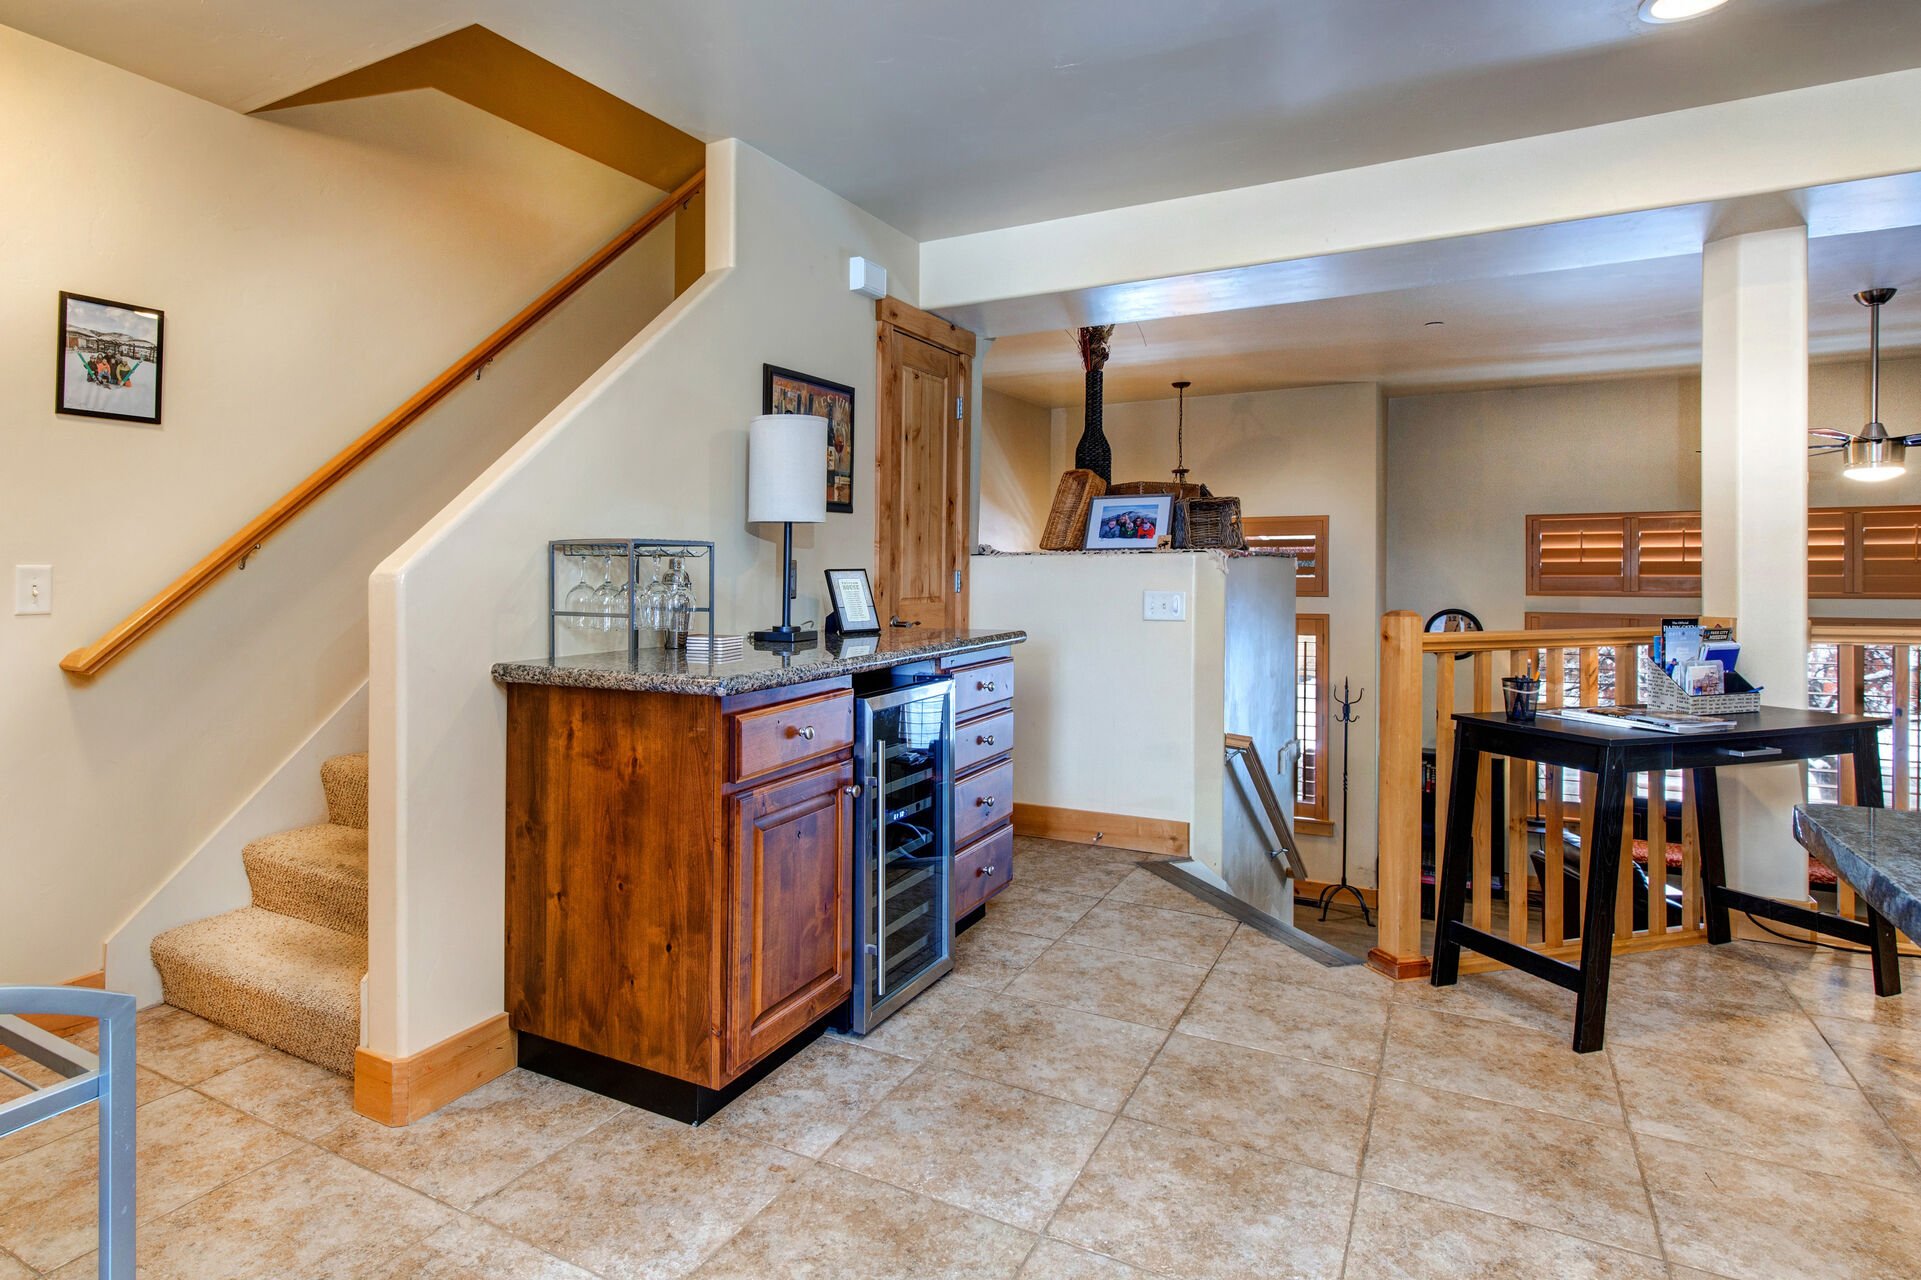 Kitchen with Stainless Steel Appliances, Ice-Maker, Wine Fridge, Stone Countertops, and Large Island with Seating for 4